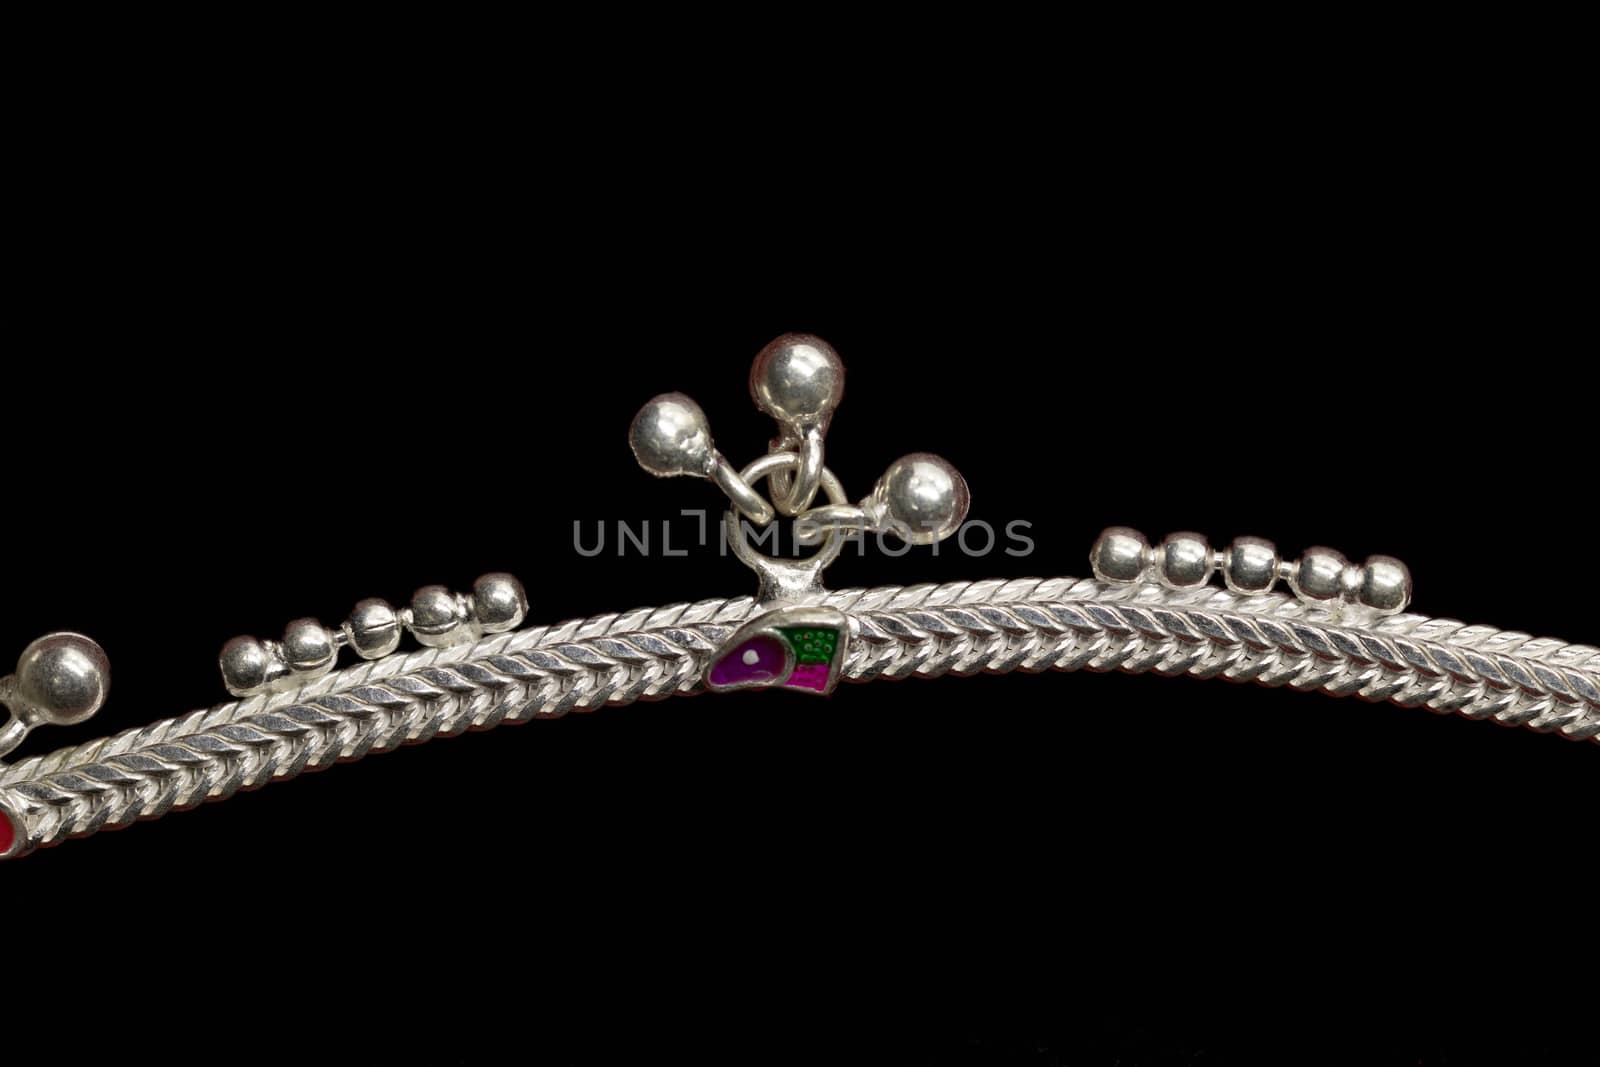 Curly silver anklet for catalogue design book on black background